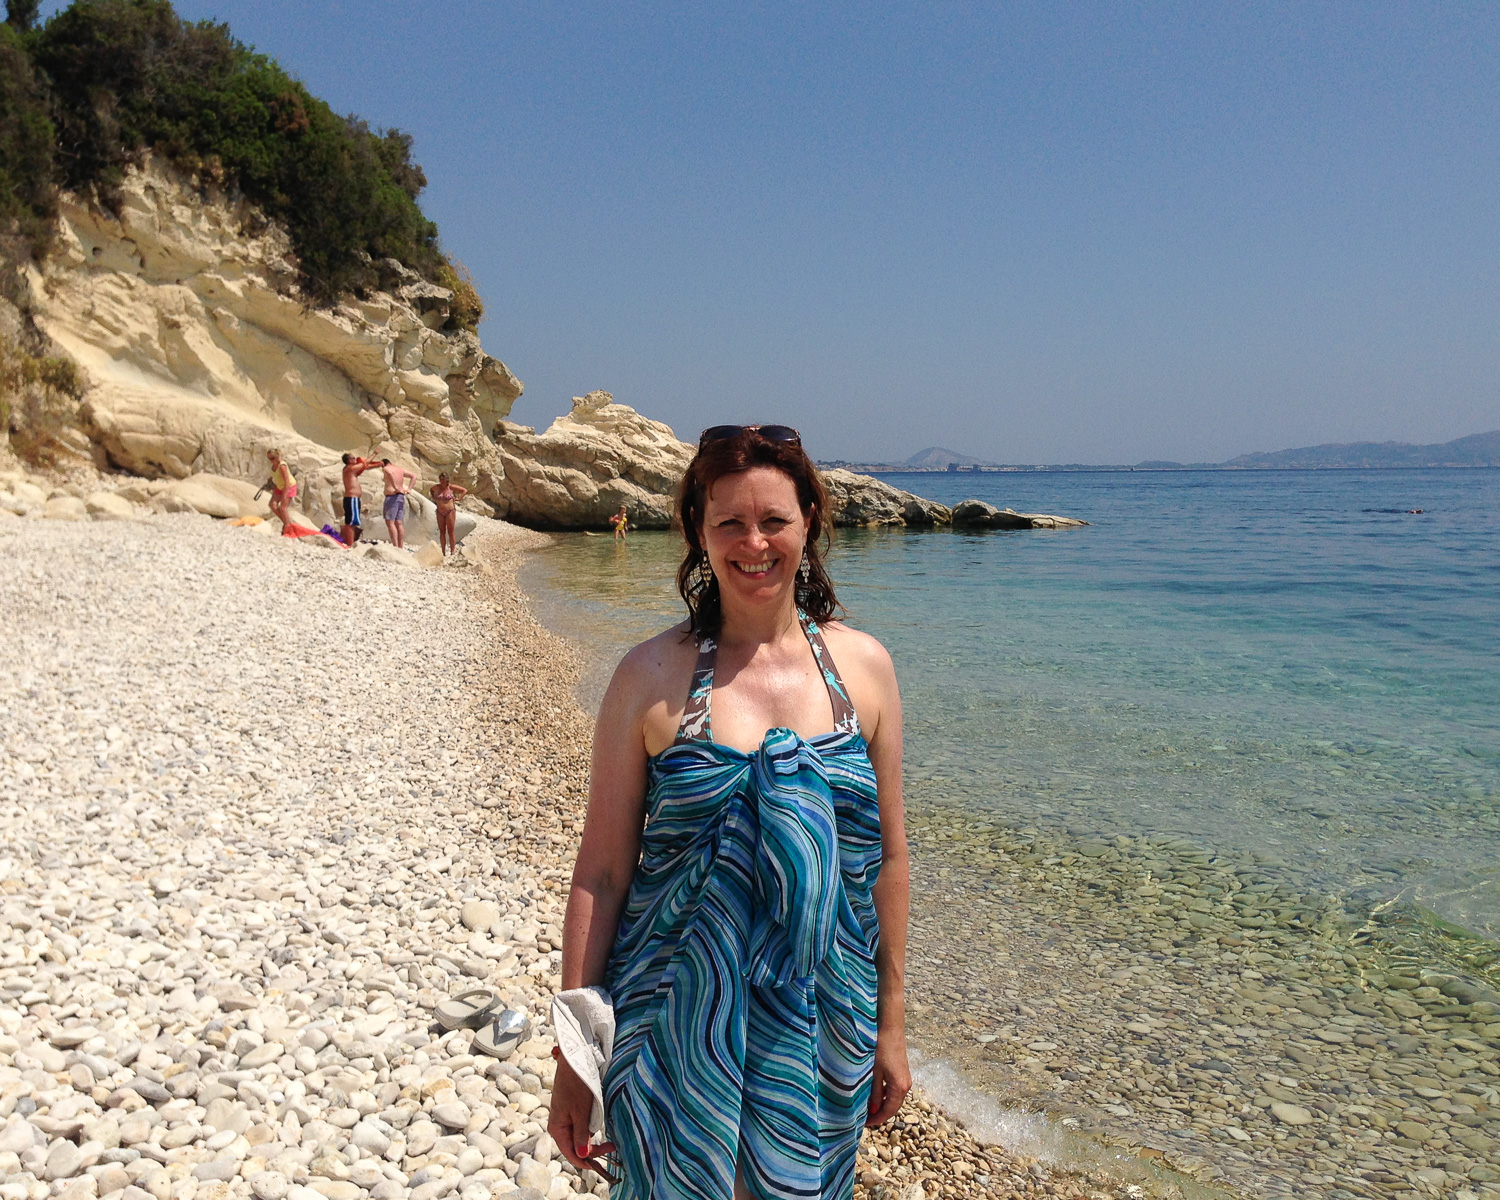 6 things the English girls get wrong on the beach in Greece! pic